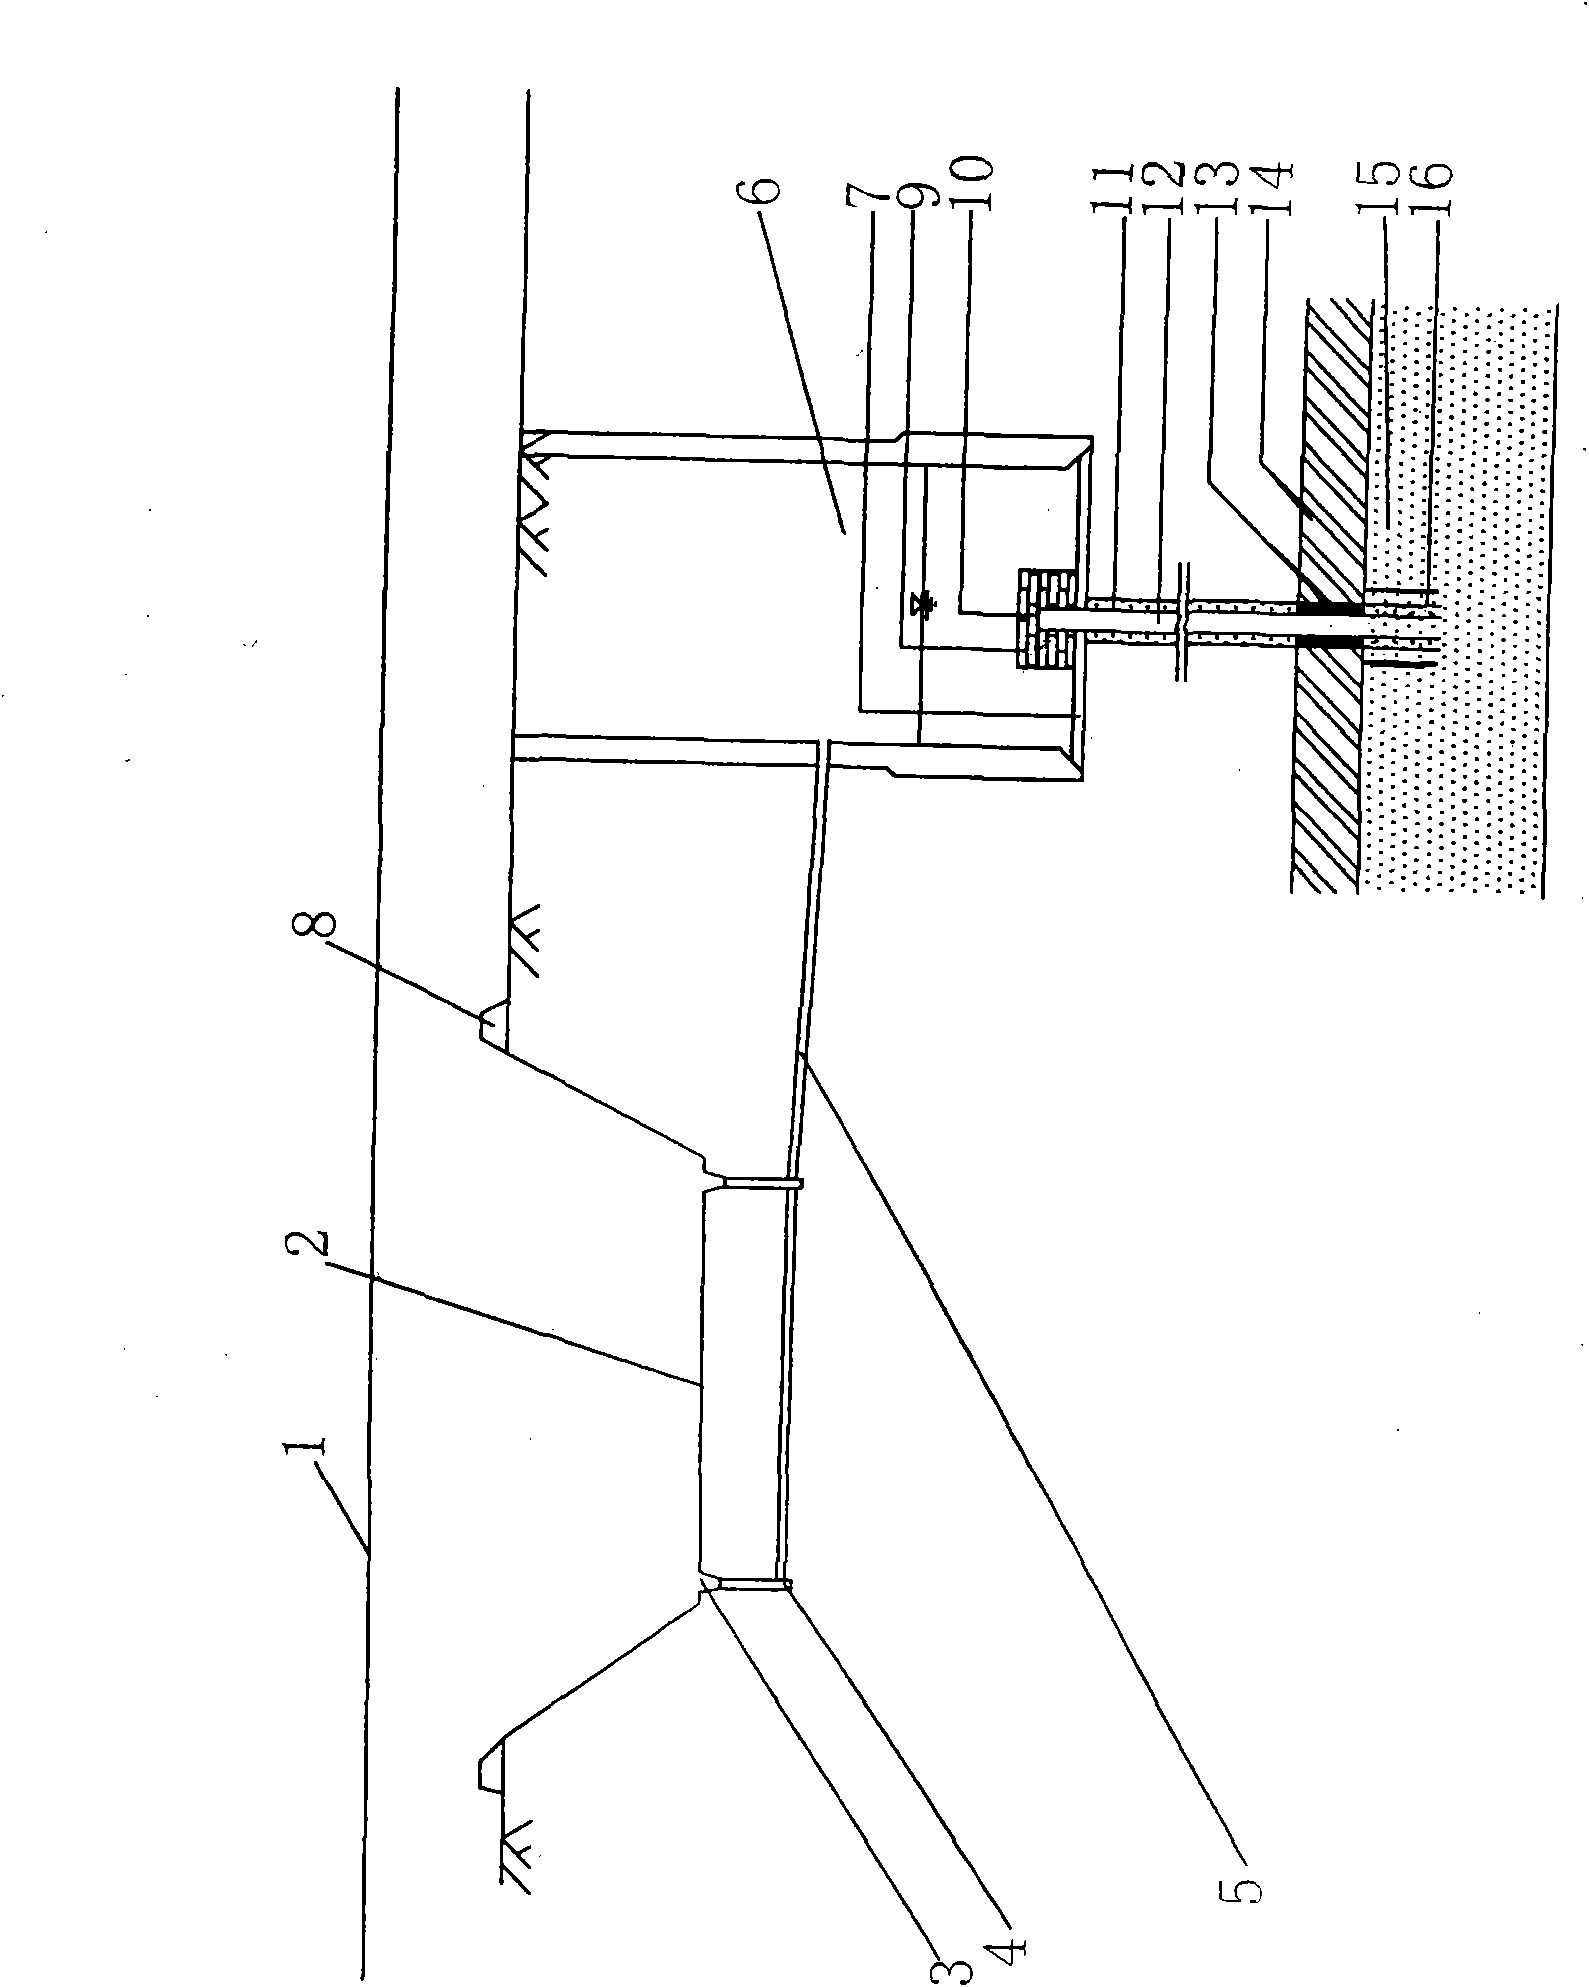 Method for comprehensively discharging accumulated water of underpass roads by deep layer of filtering settling pond